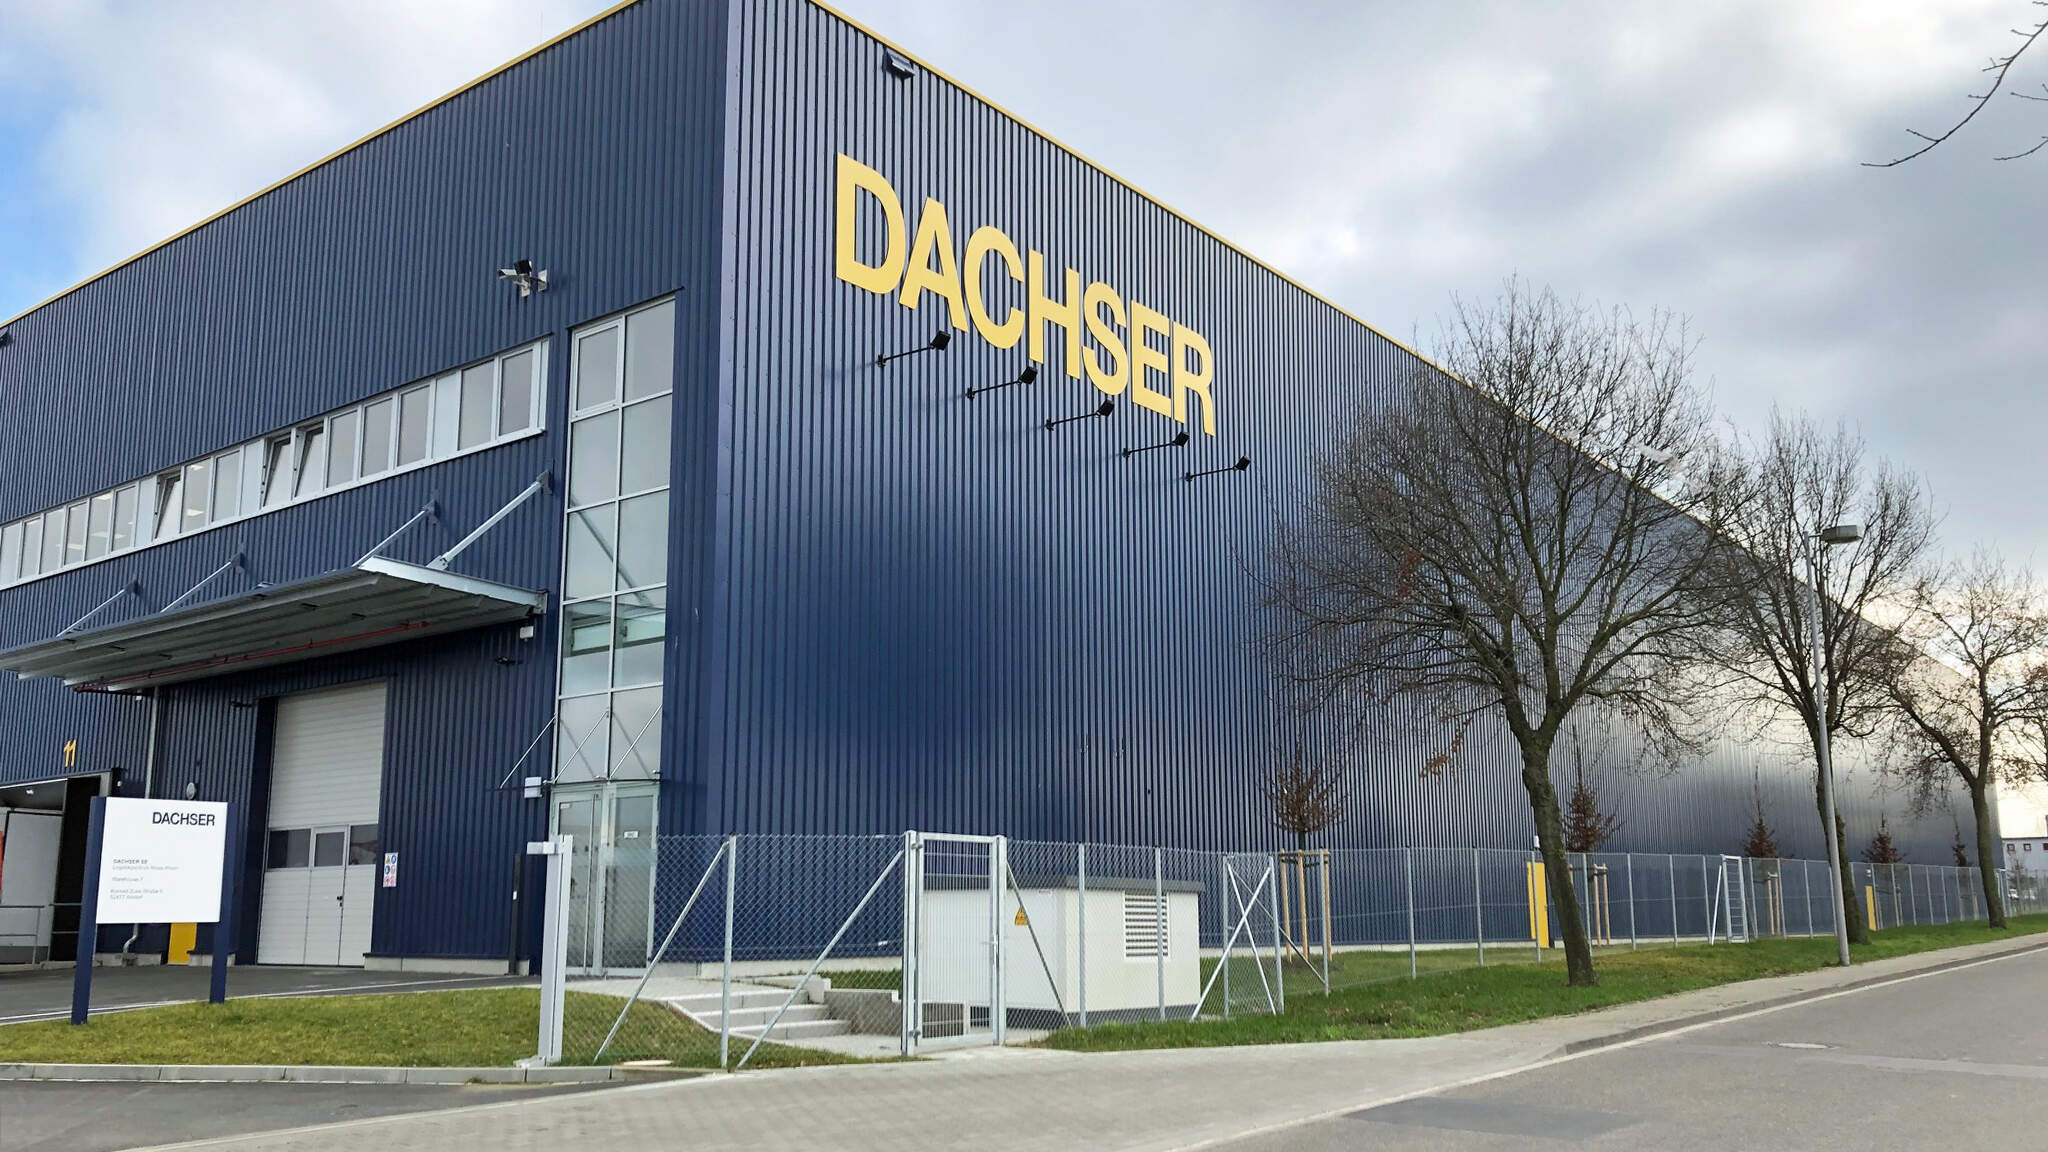 DACHSER expands its contract logistics capacities for Maas-Rhein logistics centre